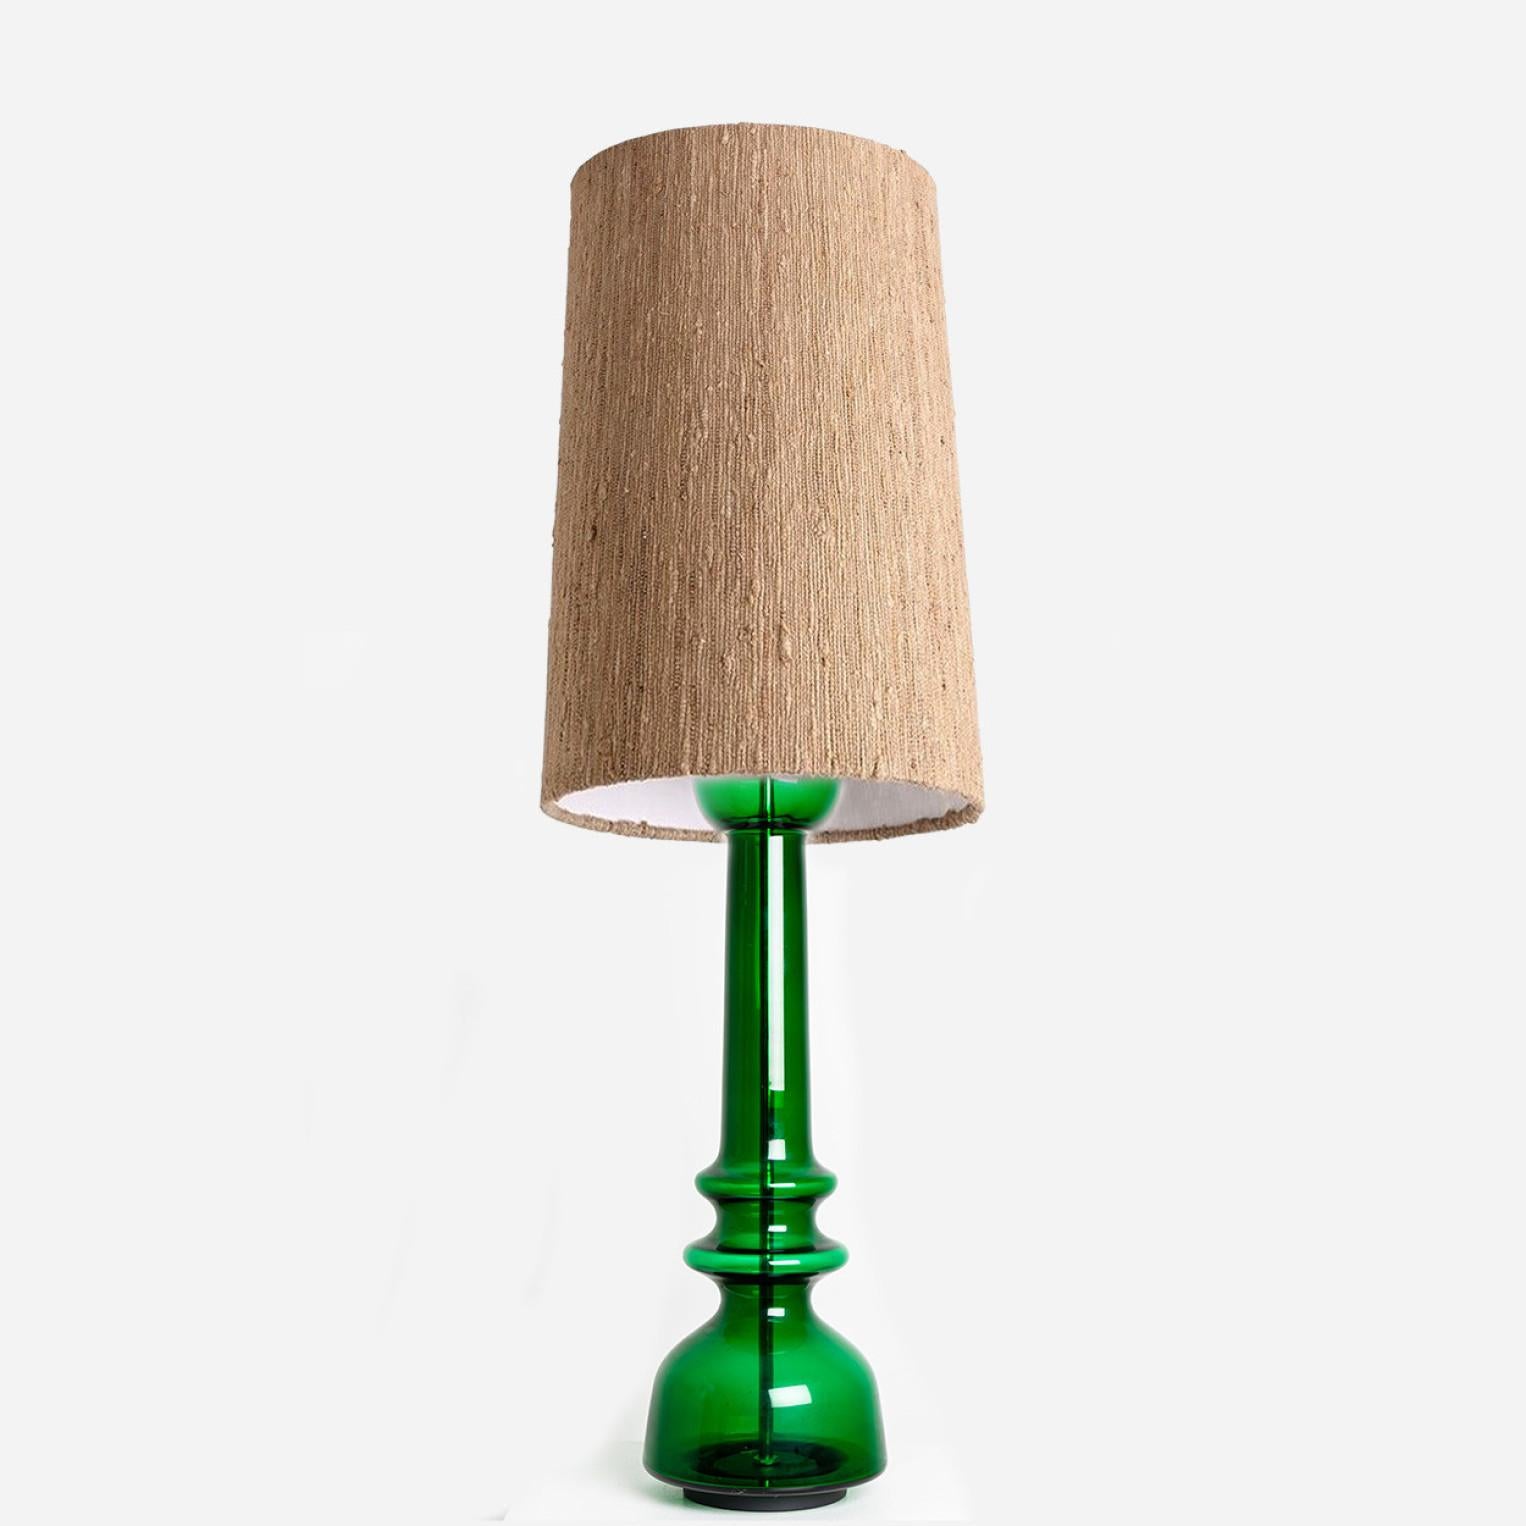 A unique minimalistic timeless design. Designed and manufactured by Doria Leuchten Germany, around 1960.
The glass table lamp features a bright green transparent base with a chrome rod running through the center. Finished with a custom made shade.